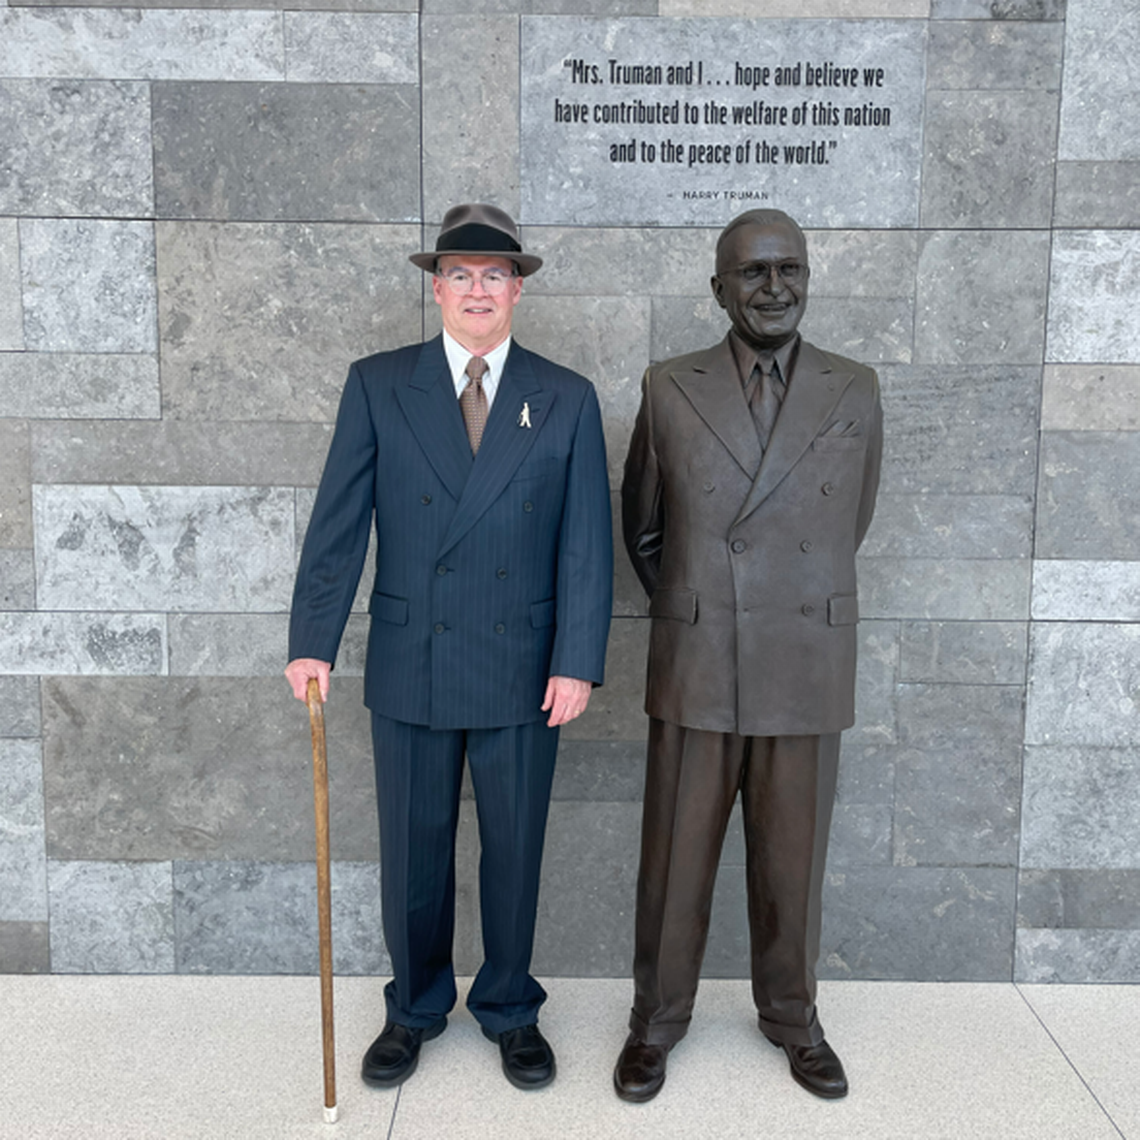 John Pritchard poses beside a statue of the president he sometimes impersonates.